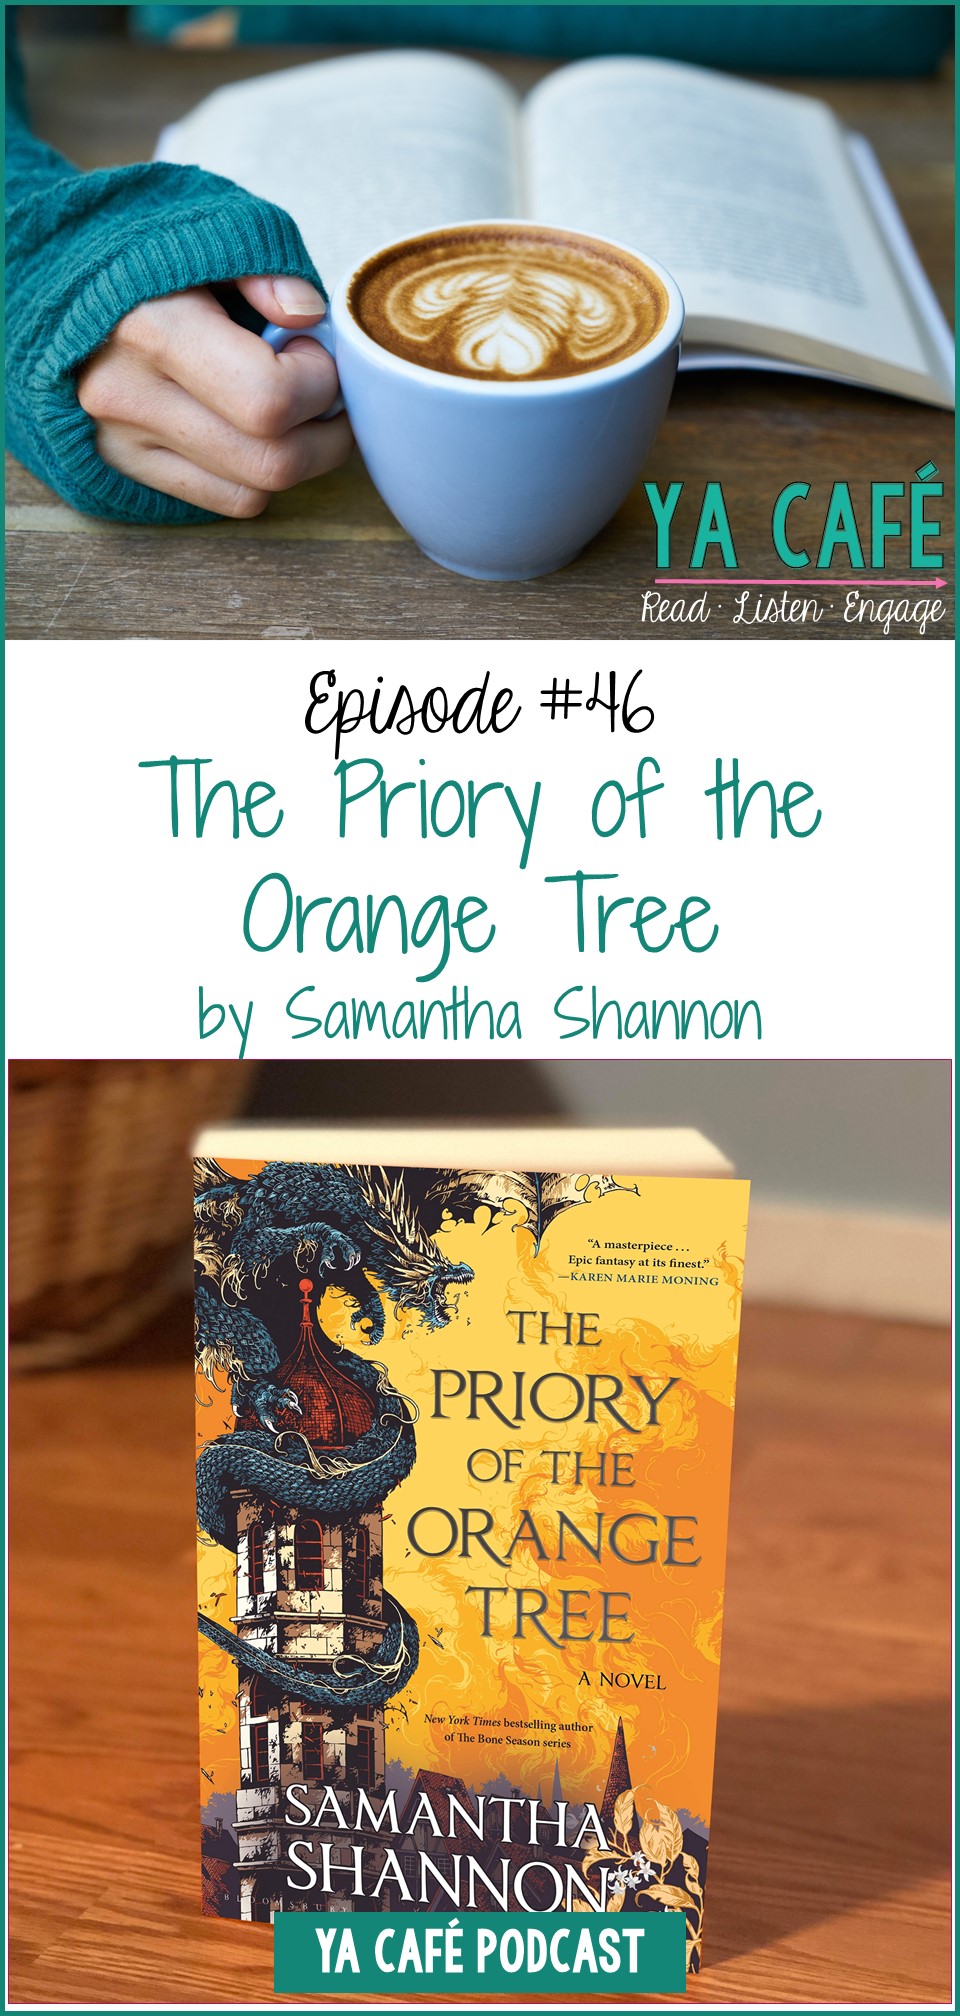 46 The Priory of the Orange Tree by Samantha Shannon feat. Somaiya Daud